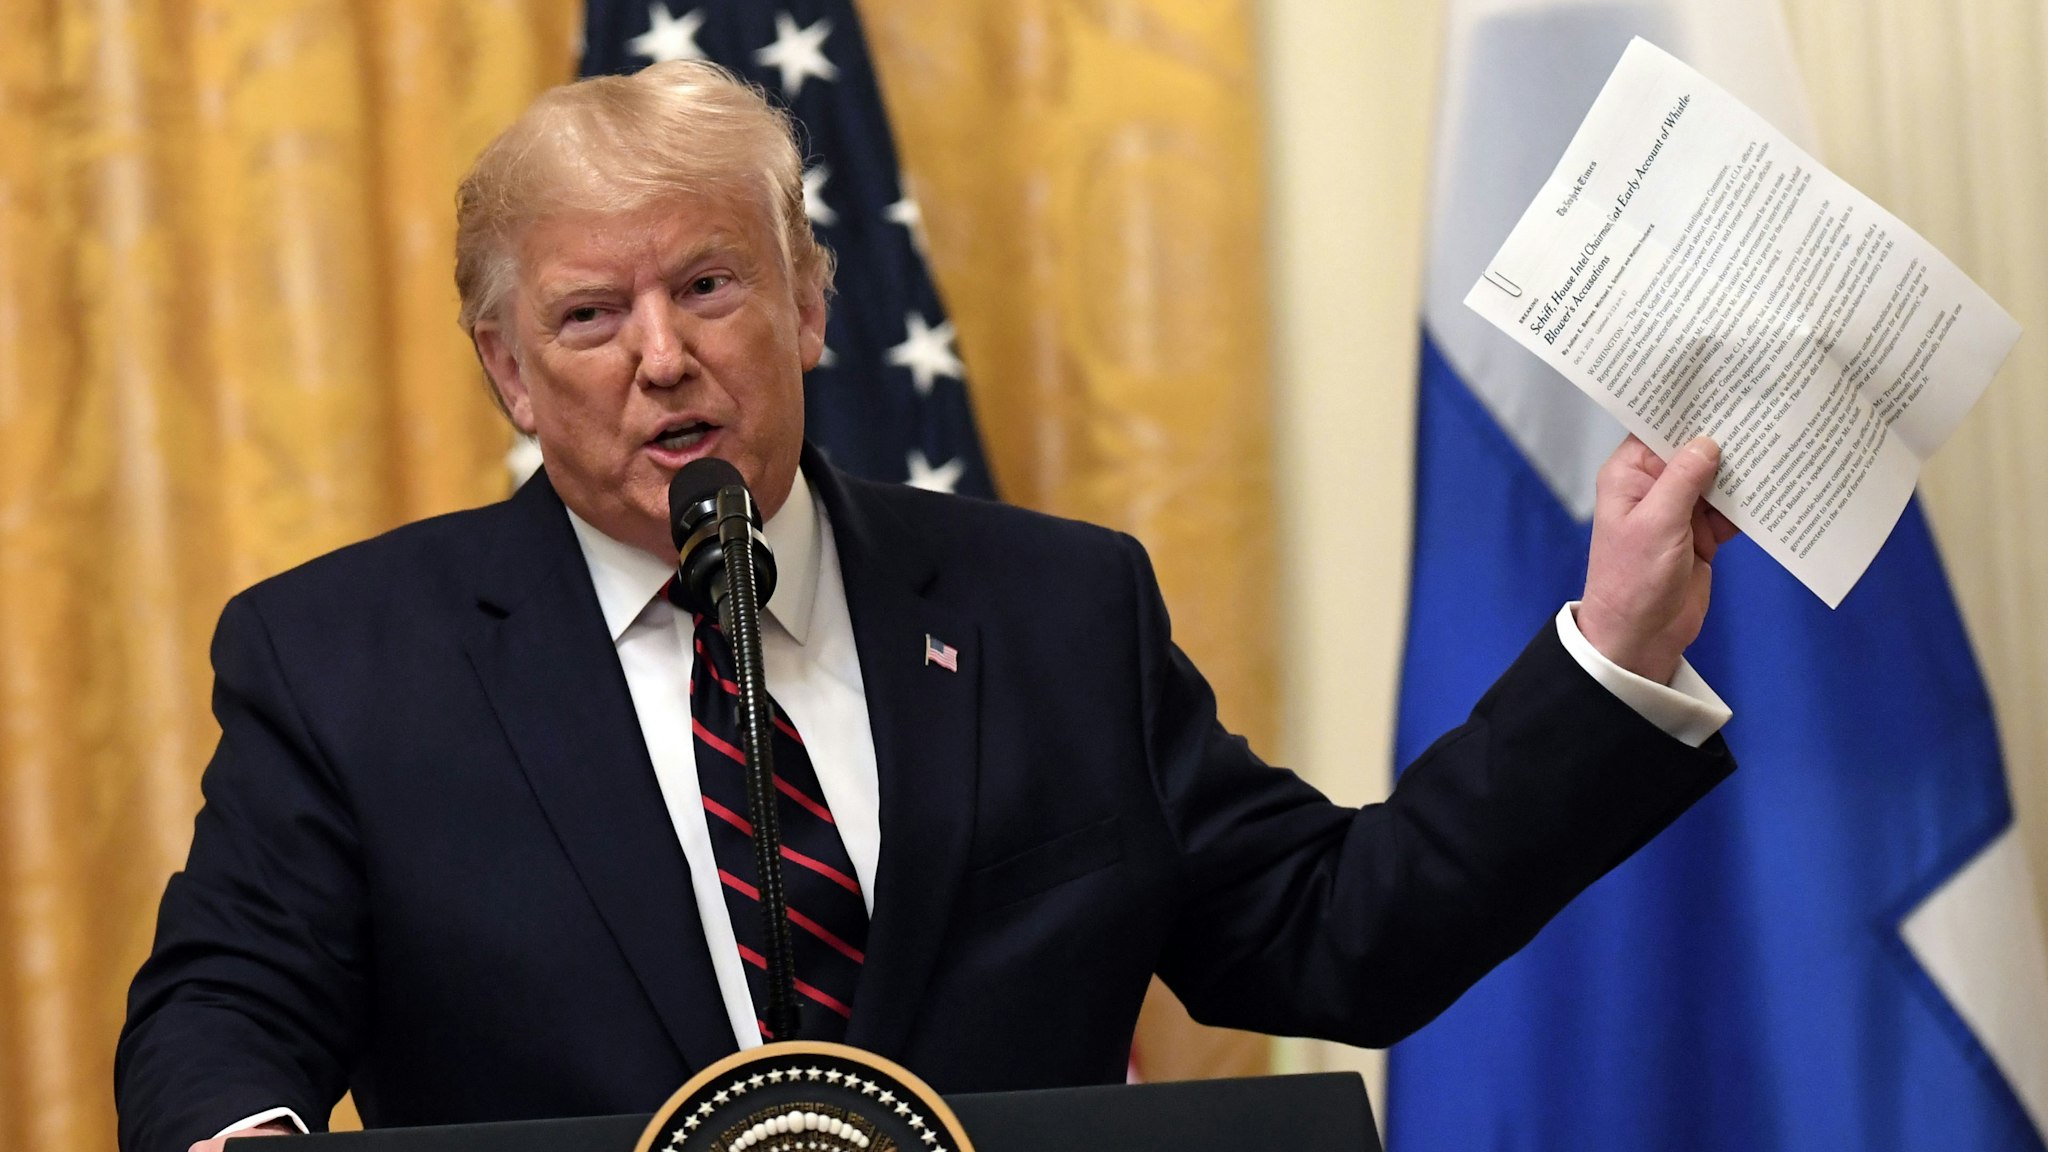 US President Donald Trump holds up a NYTimes report on House Intelligence Committee chairman Adam Schiff as he and Finnish President Sauli Niinisto(not shown) hold a joint press conference in the East Room of the White House in Washington, DC, on October 2, 2019.